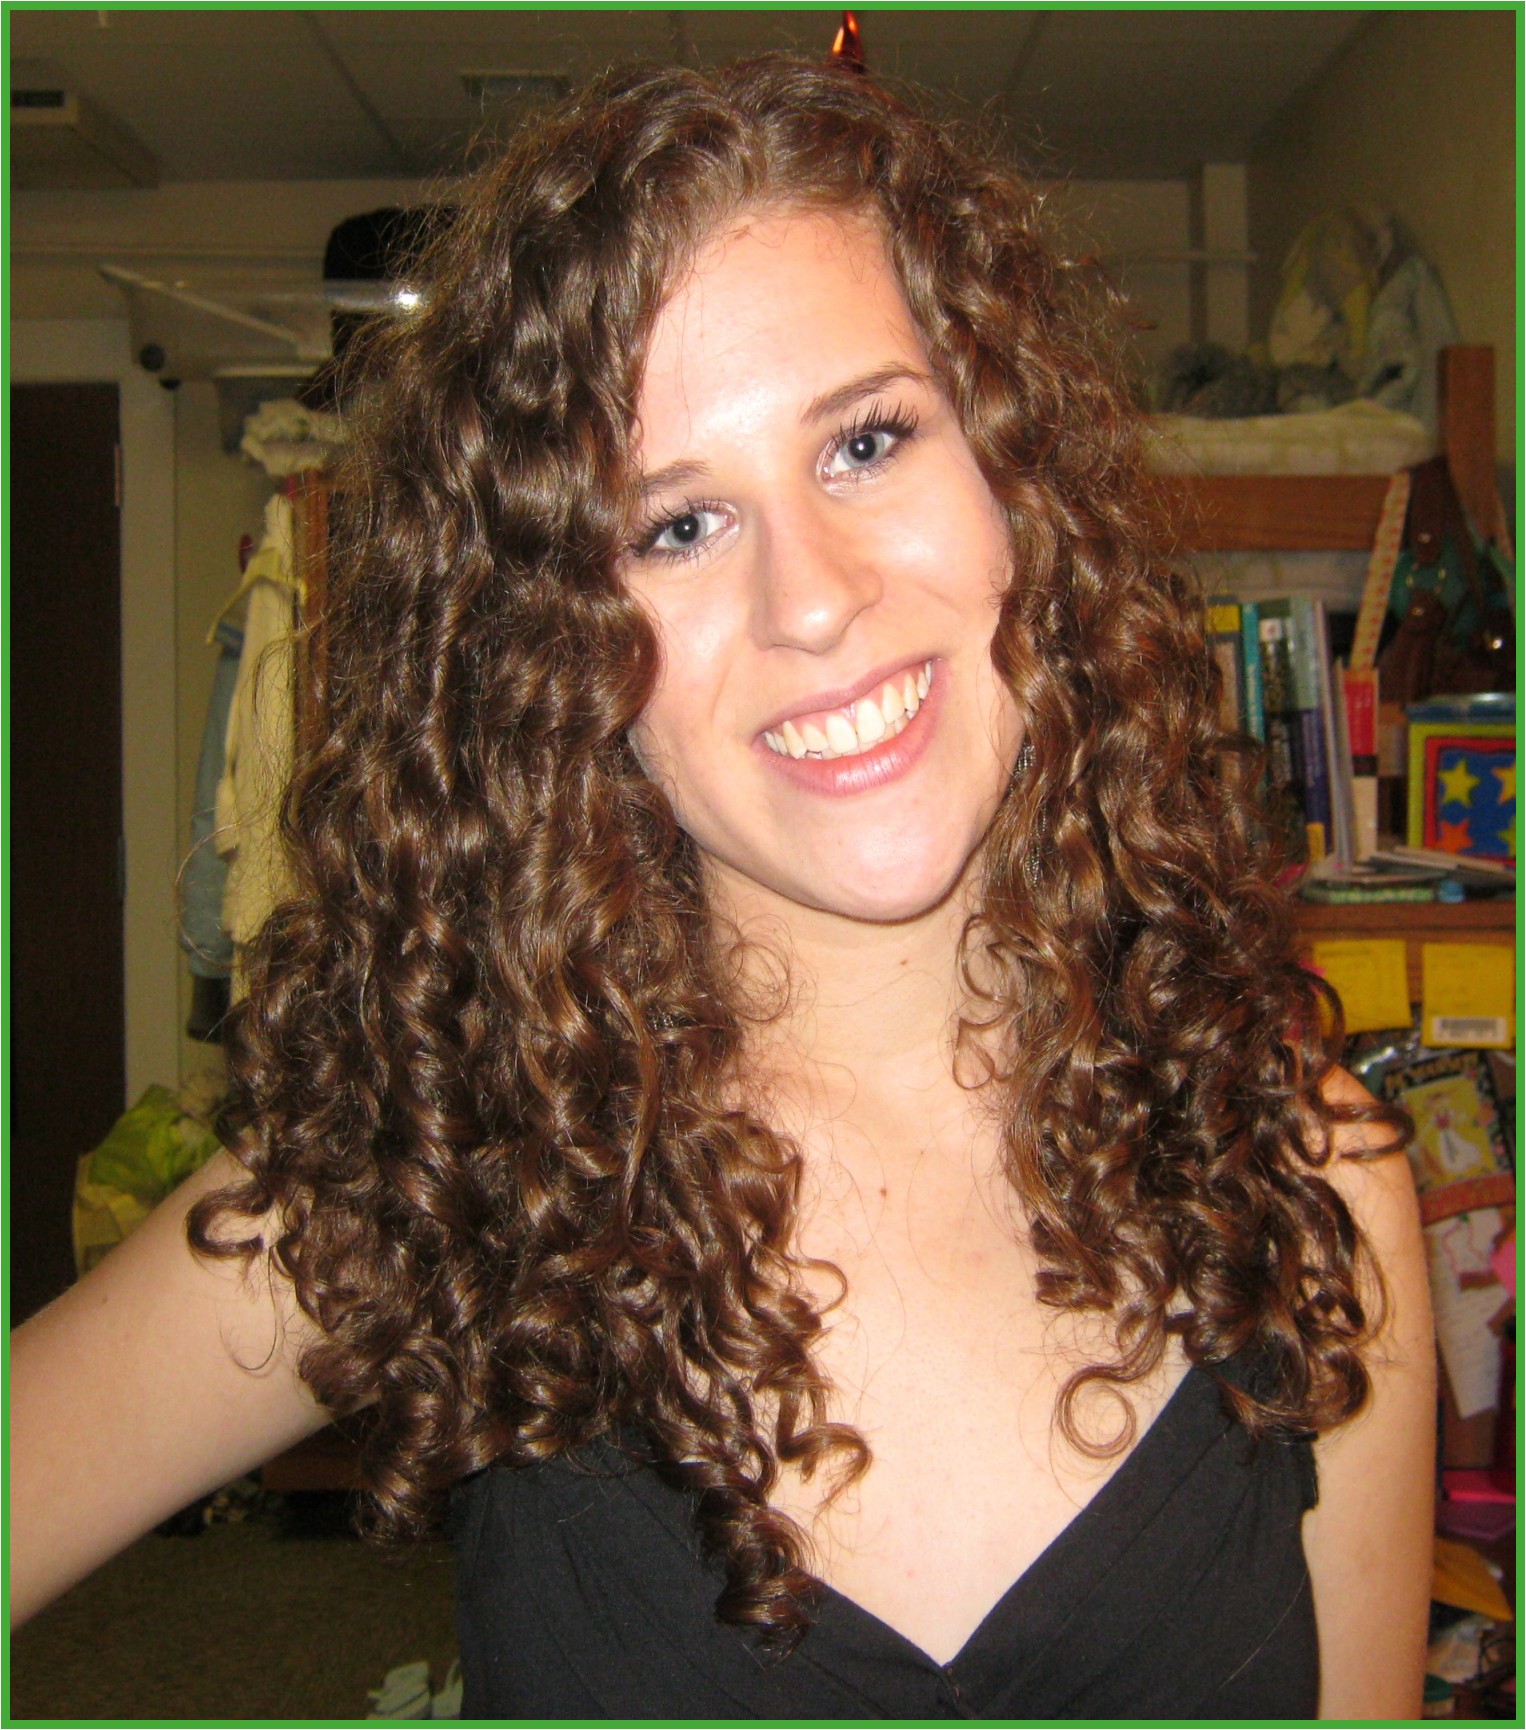 Hairstyles for Short Curly Hair Exciting Very Curly Hairstyles Fresh Curly Hair 0d Archives Hair